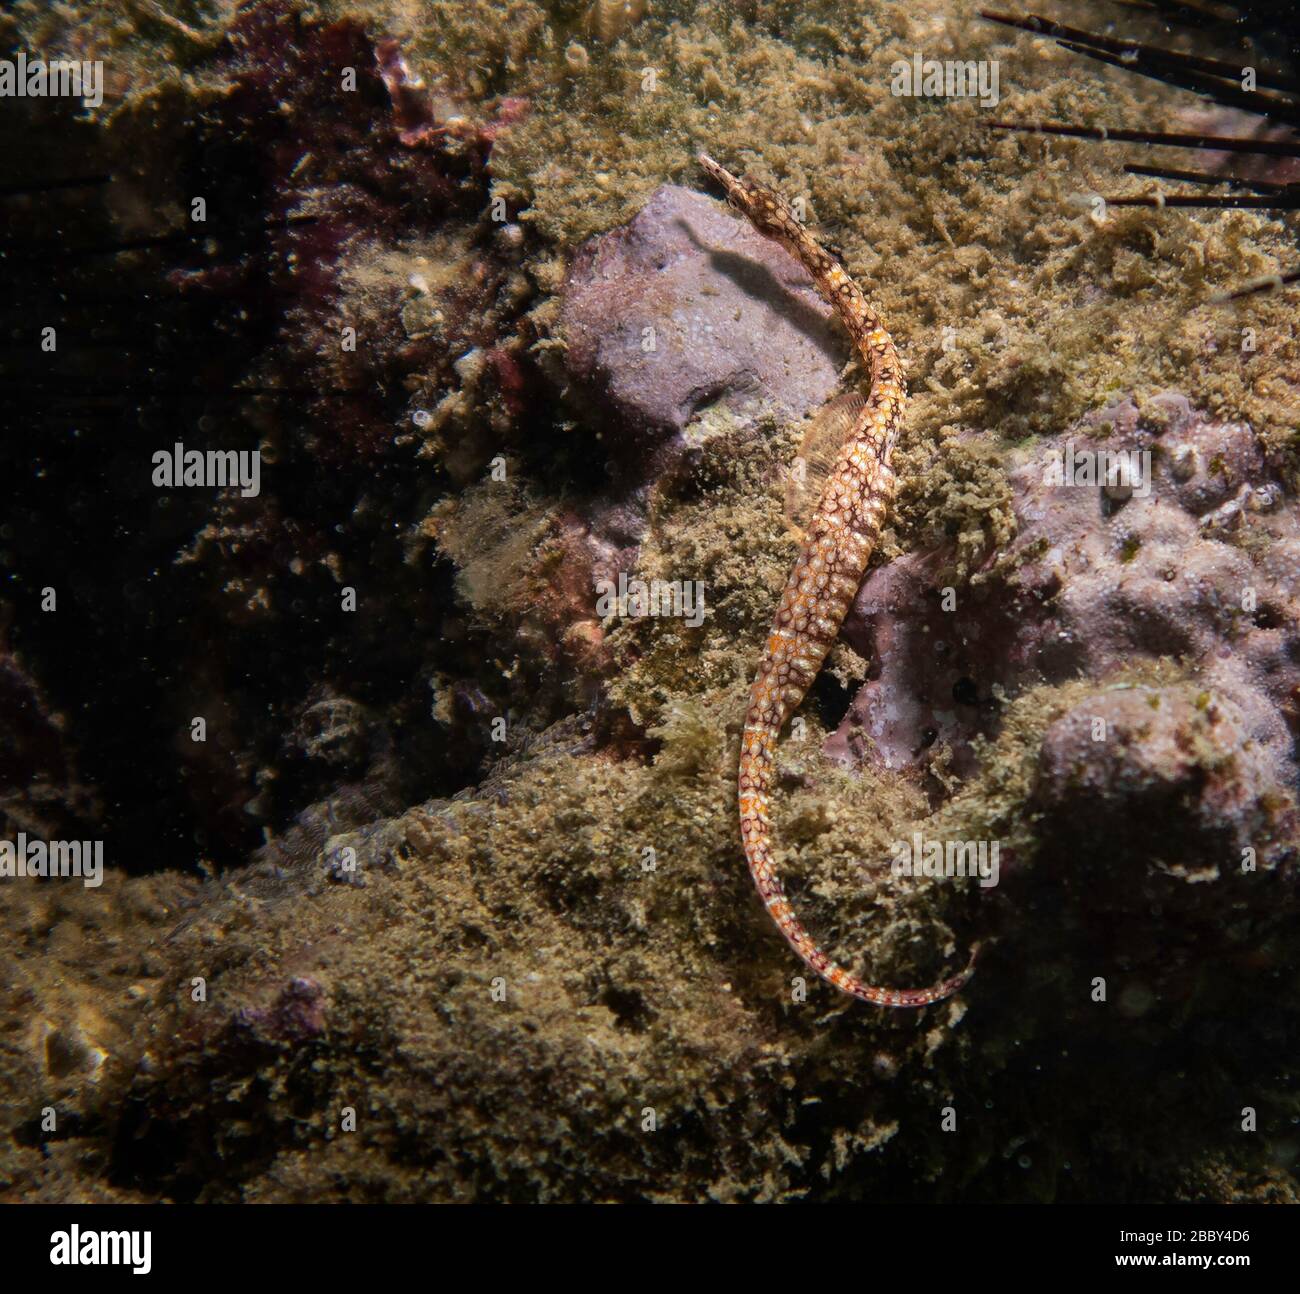 Network pipefish (Corythoichthys flavofasciatus) resting on a coral reef, Gulf of Oman, Indian Ocean, Arabian Peninsula, Middle East, color Stock Photo